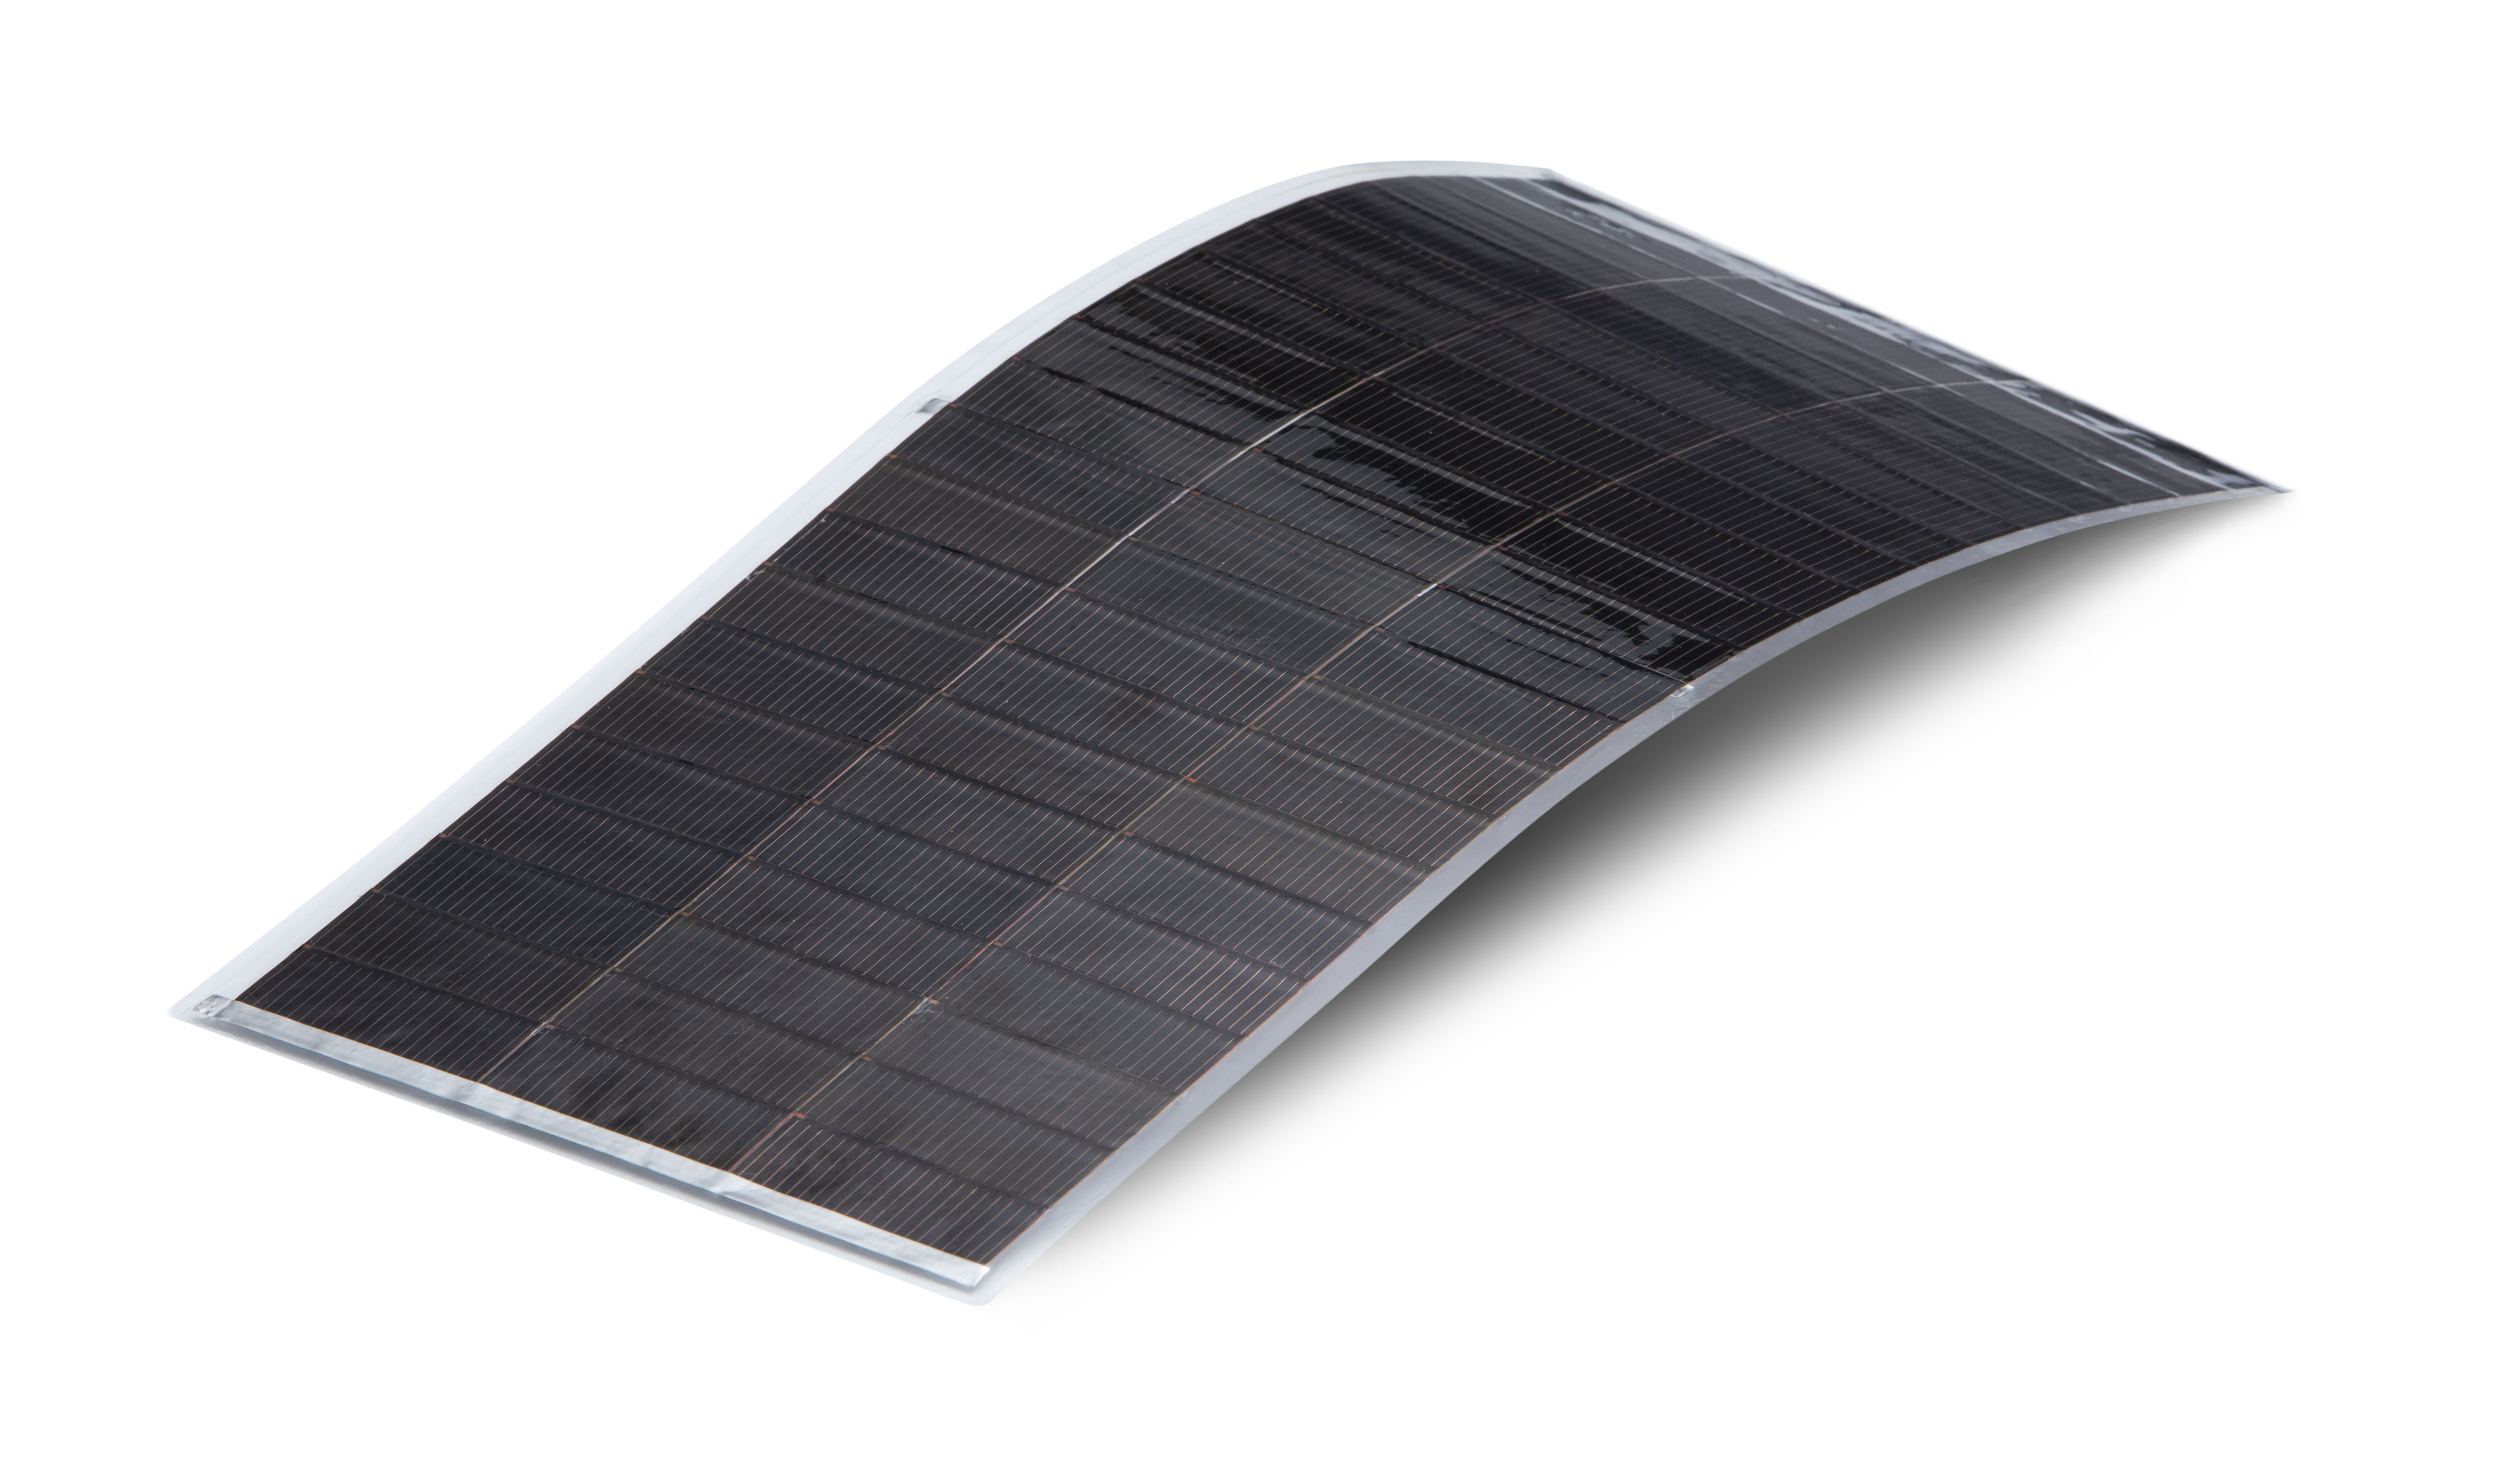 Alta Devices solar component is designed for use in unmanned aerial vehicles UAVs that can serve as platforms for cellul